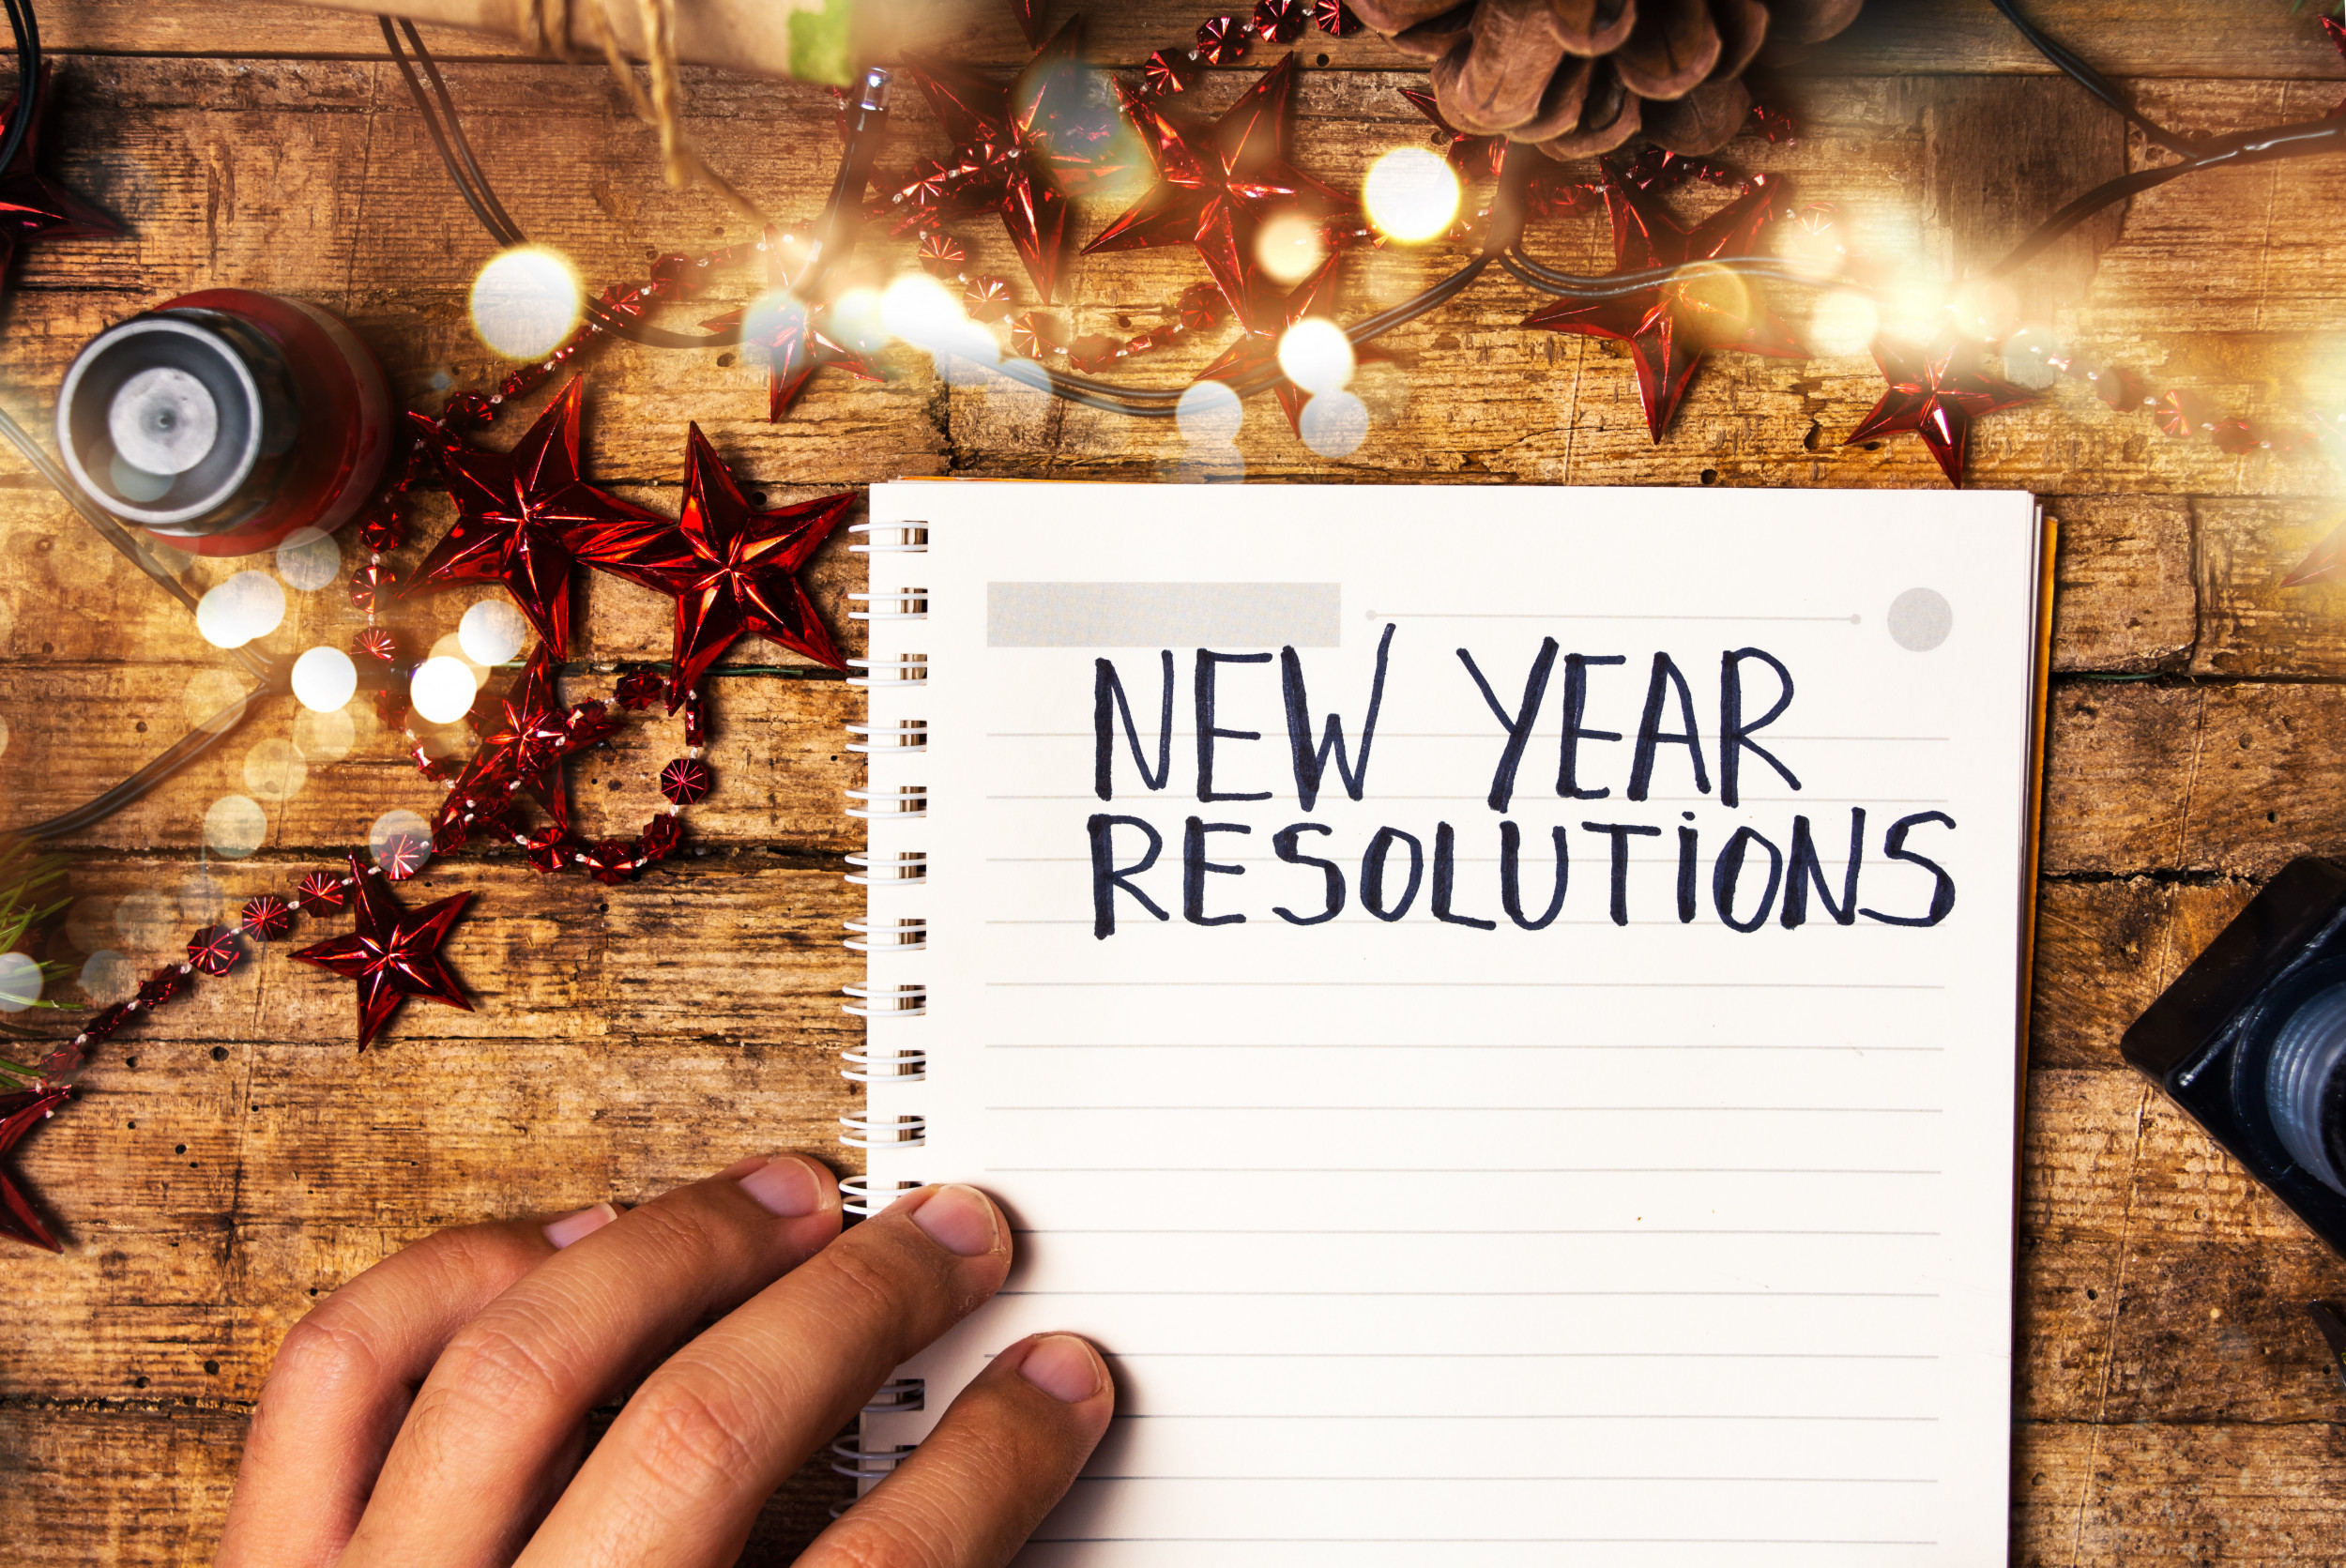 New years resolutions is. New year Resolutions. New year`s Resolutions. Resolutions for New year. New year Resolutions картинки.